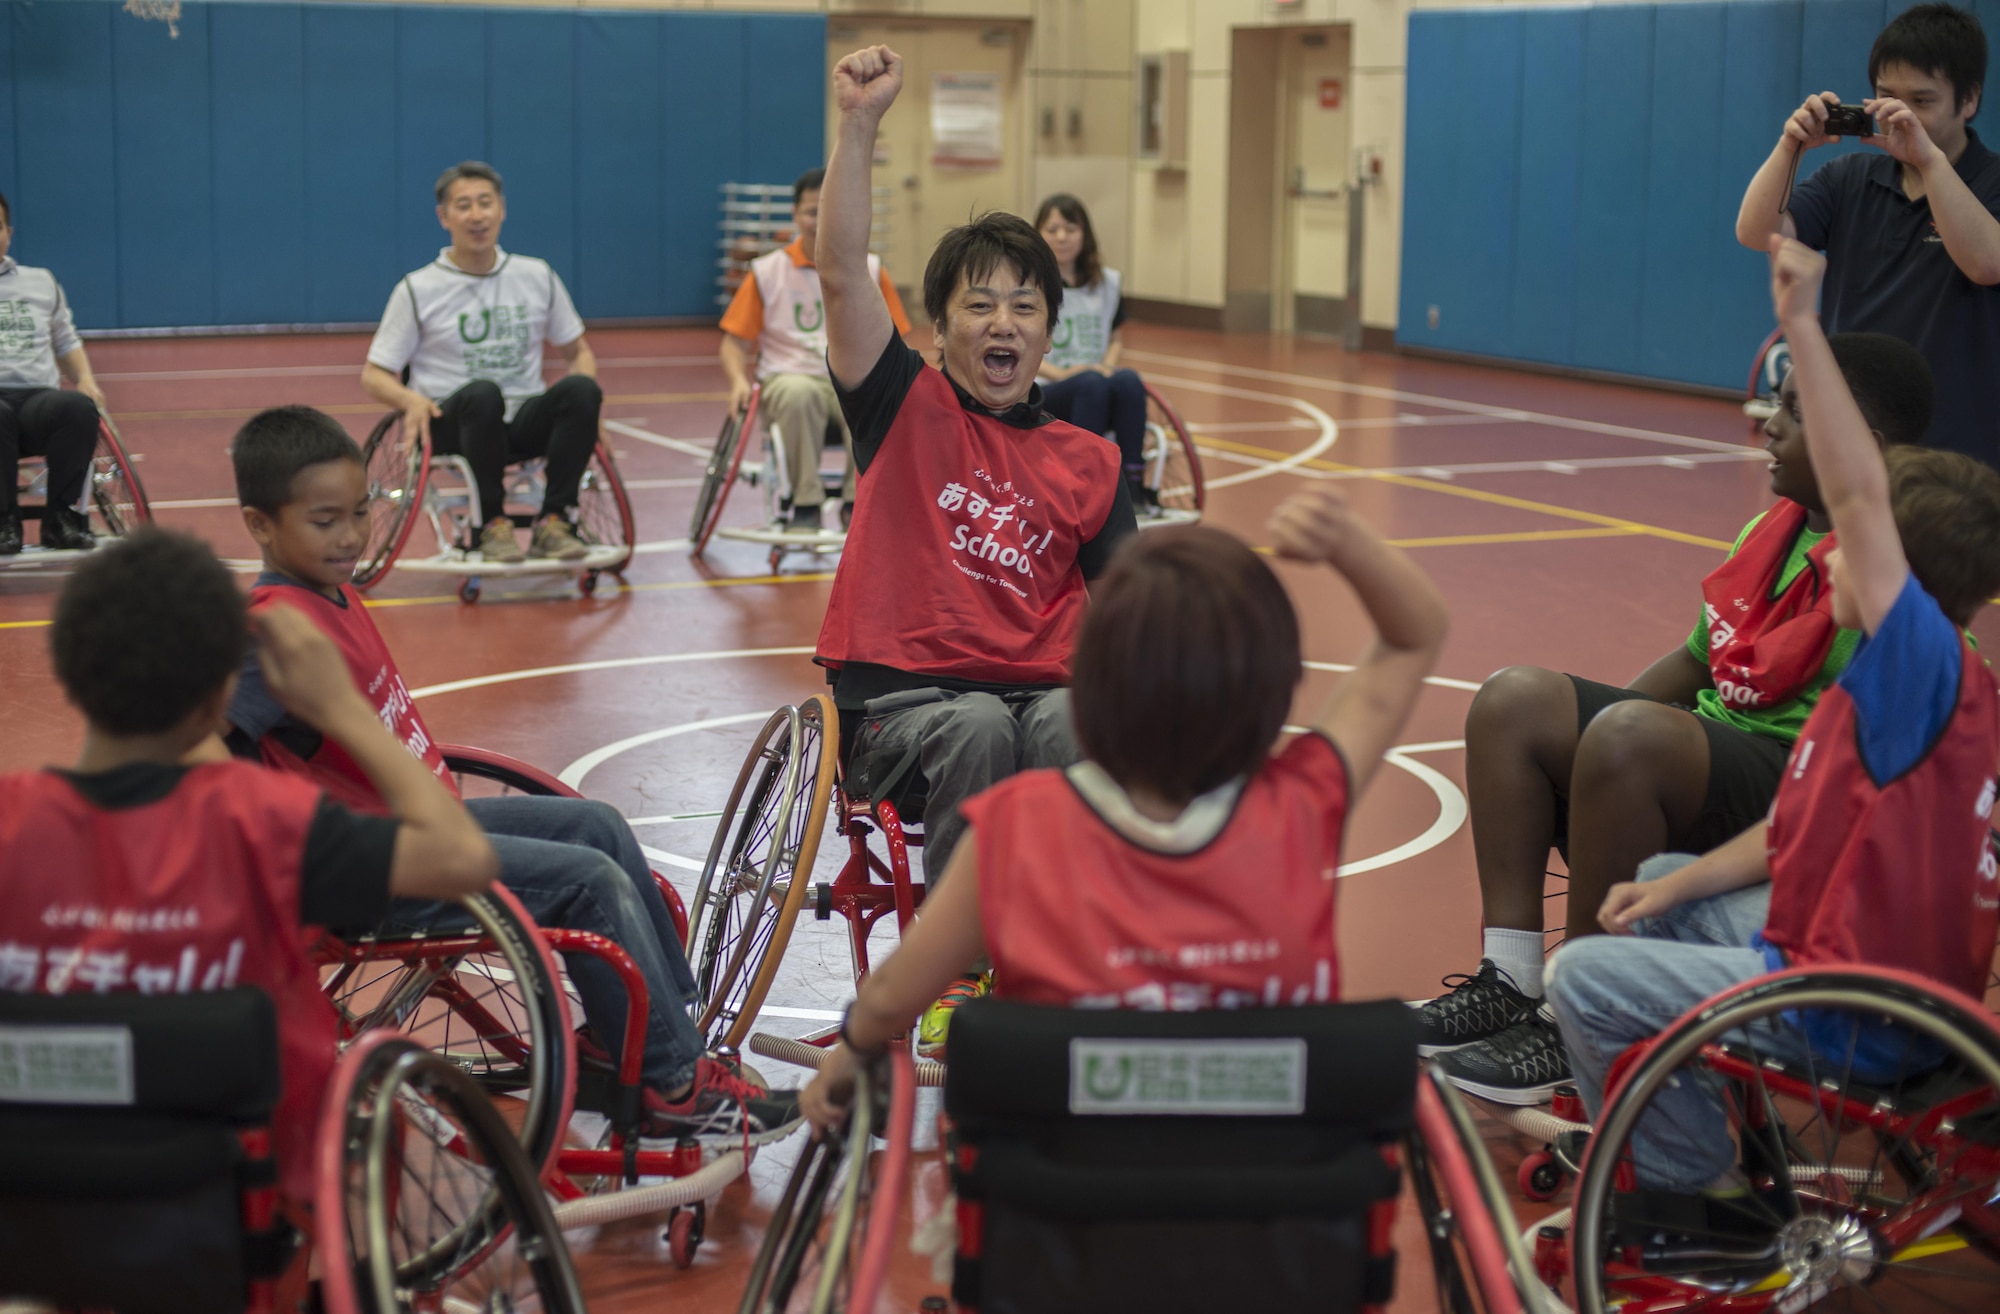 Shinji Negi, a project director with the Nippon Foundation Paralympic Support Center, chants with children at the Lunney Youth Center at Misawa Air Base, Japan, June 28, 2016. Negi travels across the world in order to teach children about life with disabilities and persevering despite difficulties that may occur in life. He was paralyzed from the waist down in high school and went on to become the captain of the Japan Men's National Wheelchair Basketball Team at the 2000 Sydney Paralympic Games. (U.S. Air Force photo by Senior Airman Brittany A. Chase)